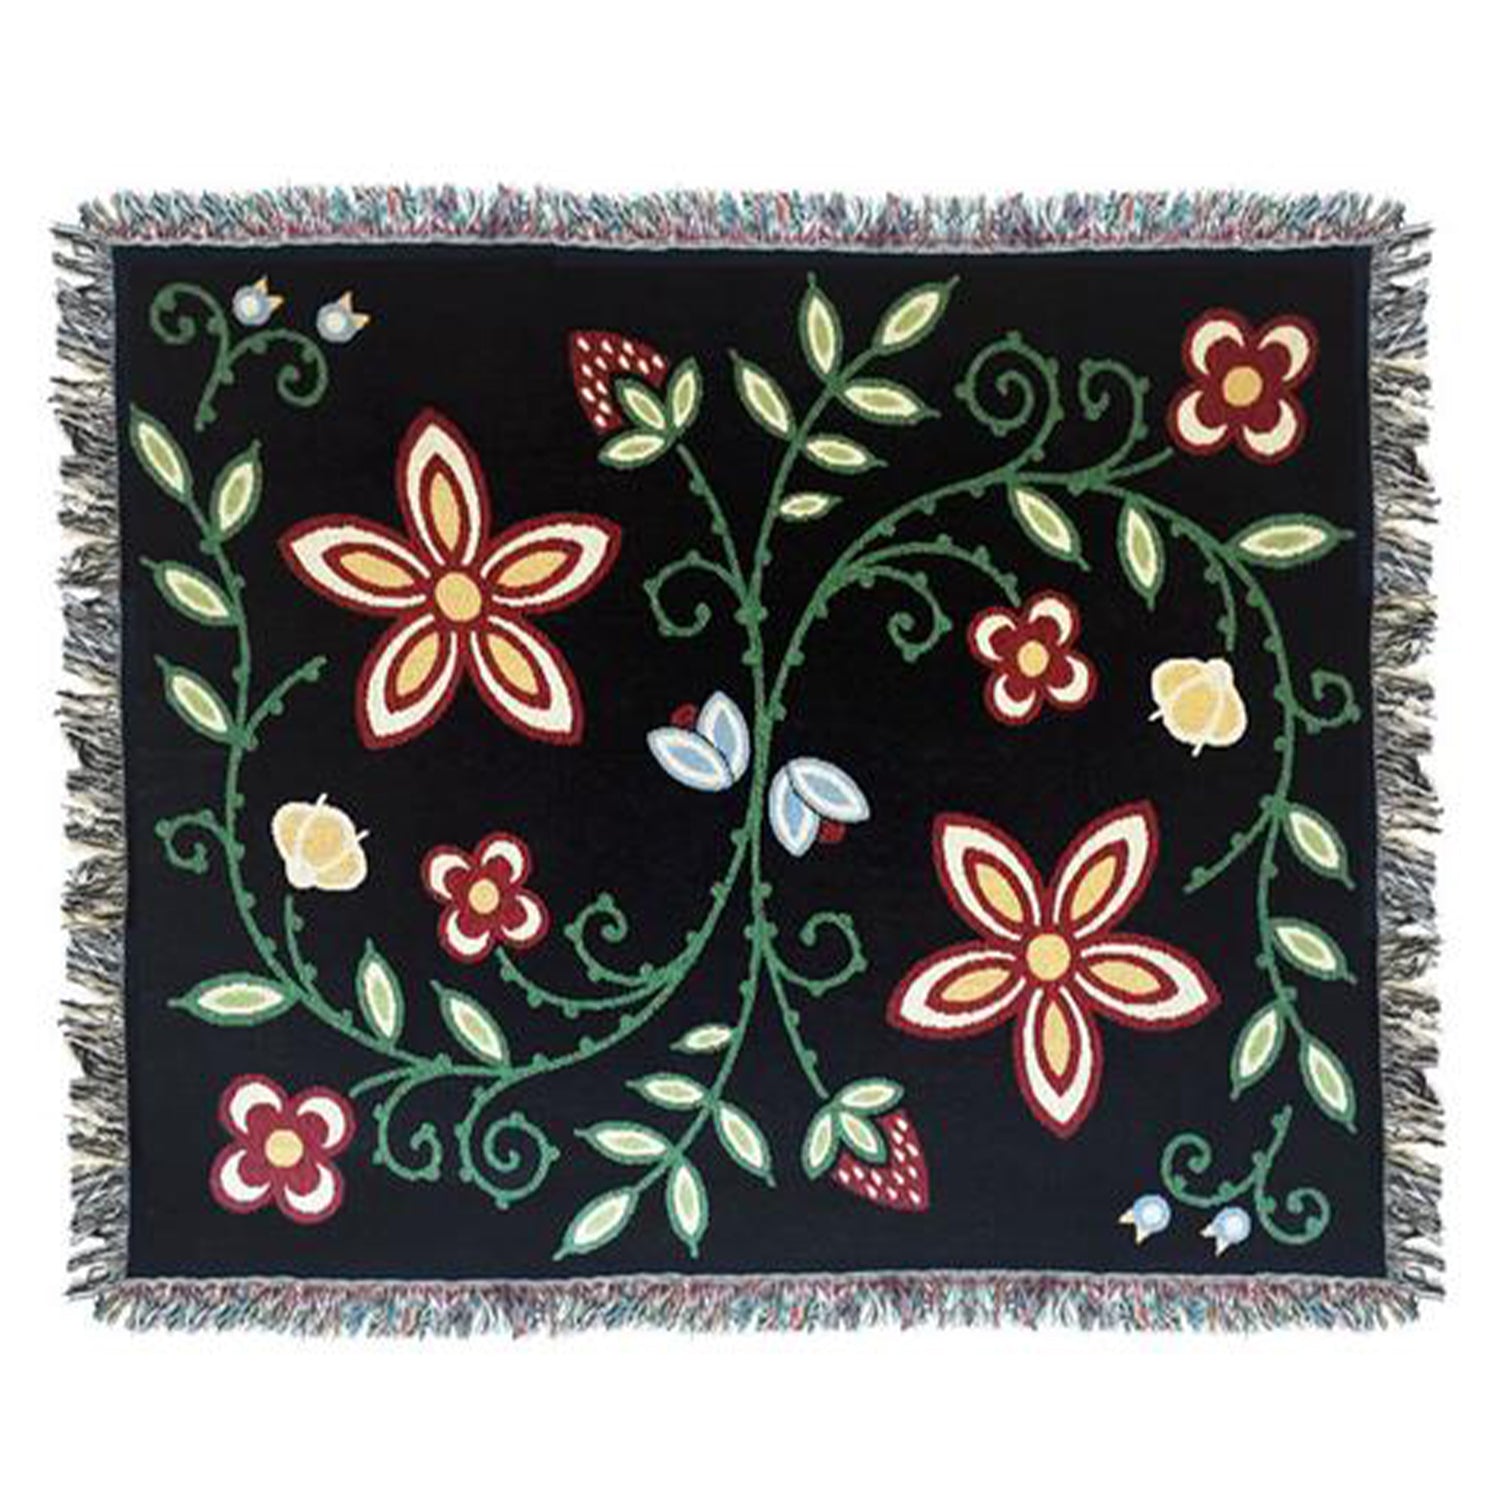 Product photo of Woodlands throw blanket in black, design shows- strawberries, wild rice, blueberries, and a green vine connecting all the plants